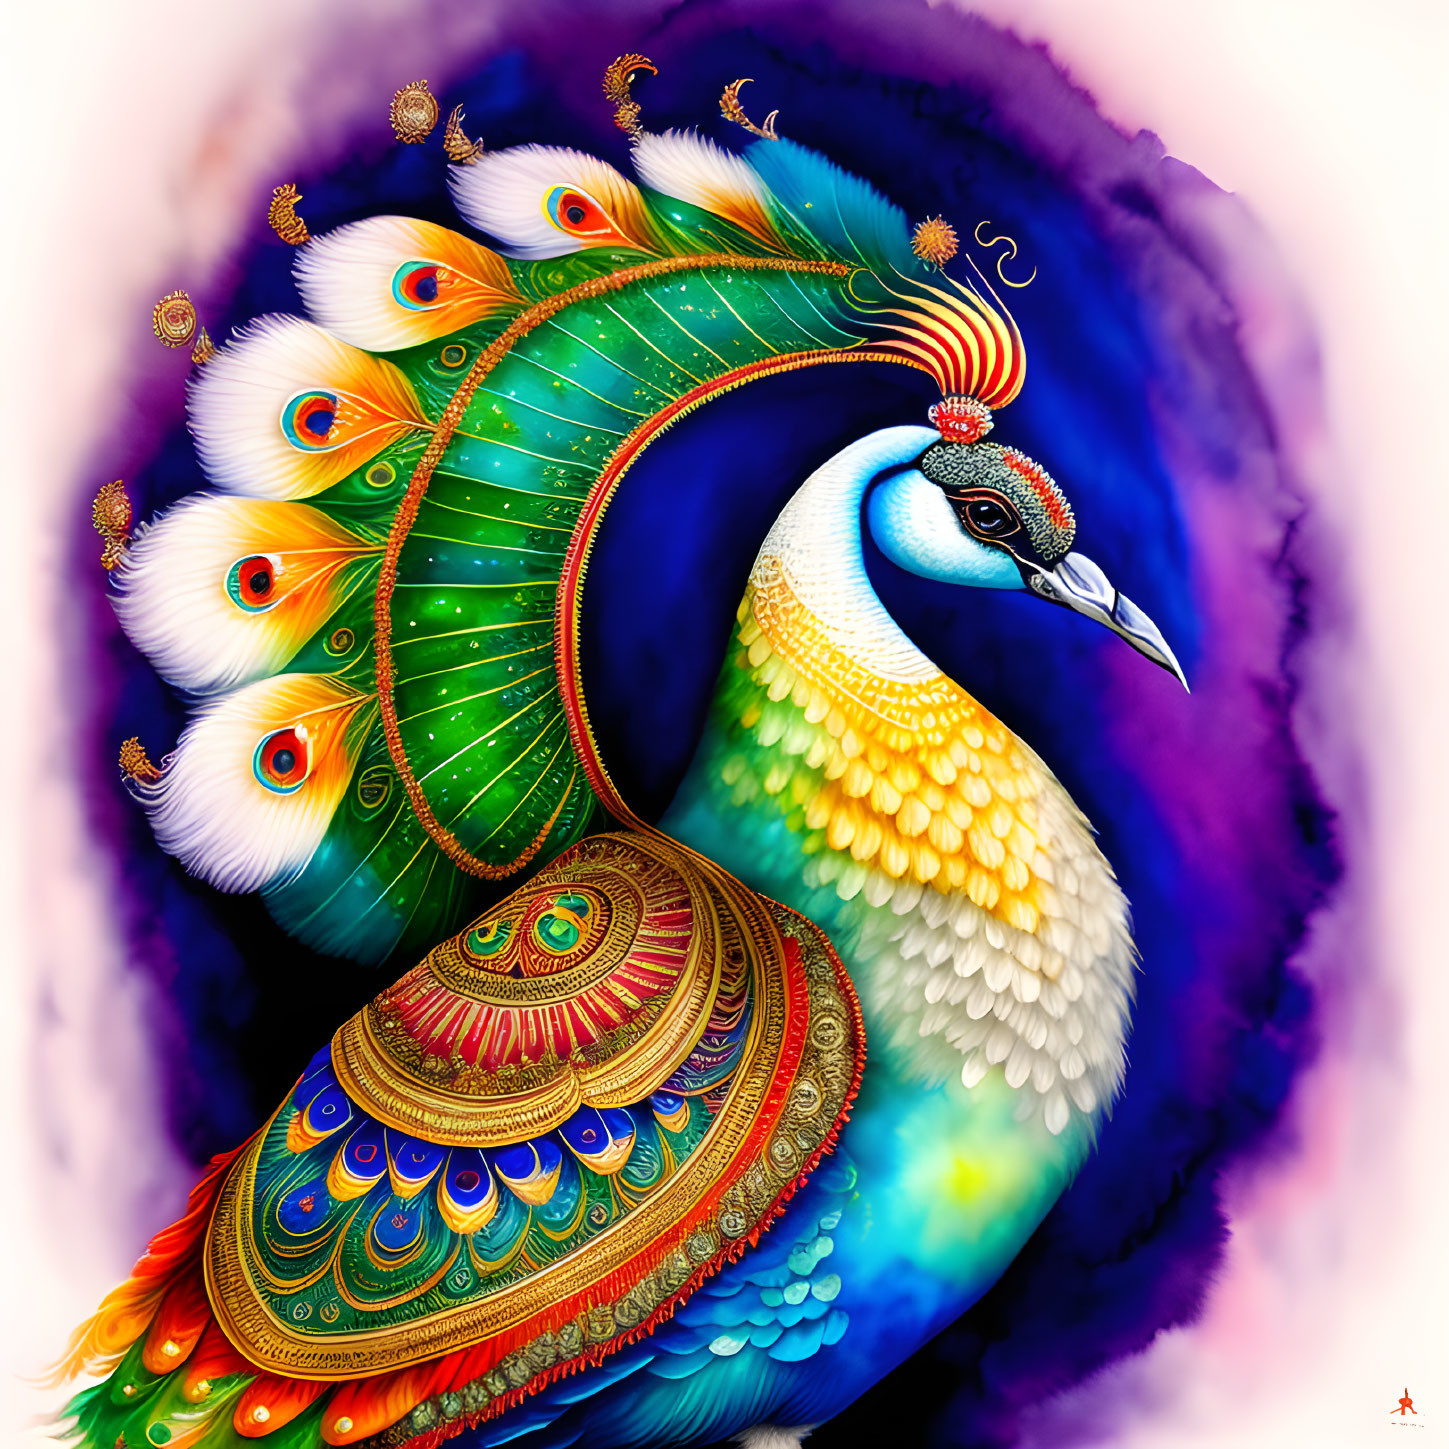 Colorful Peacock Artwork with Elaborate Feathers in Blues, Greens, and Gold